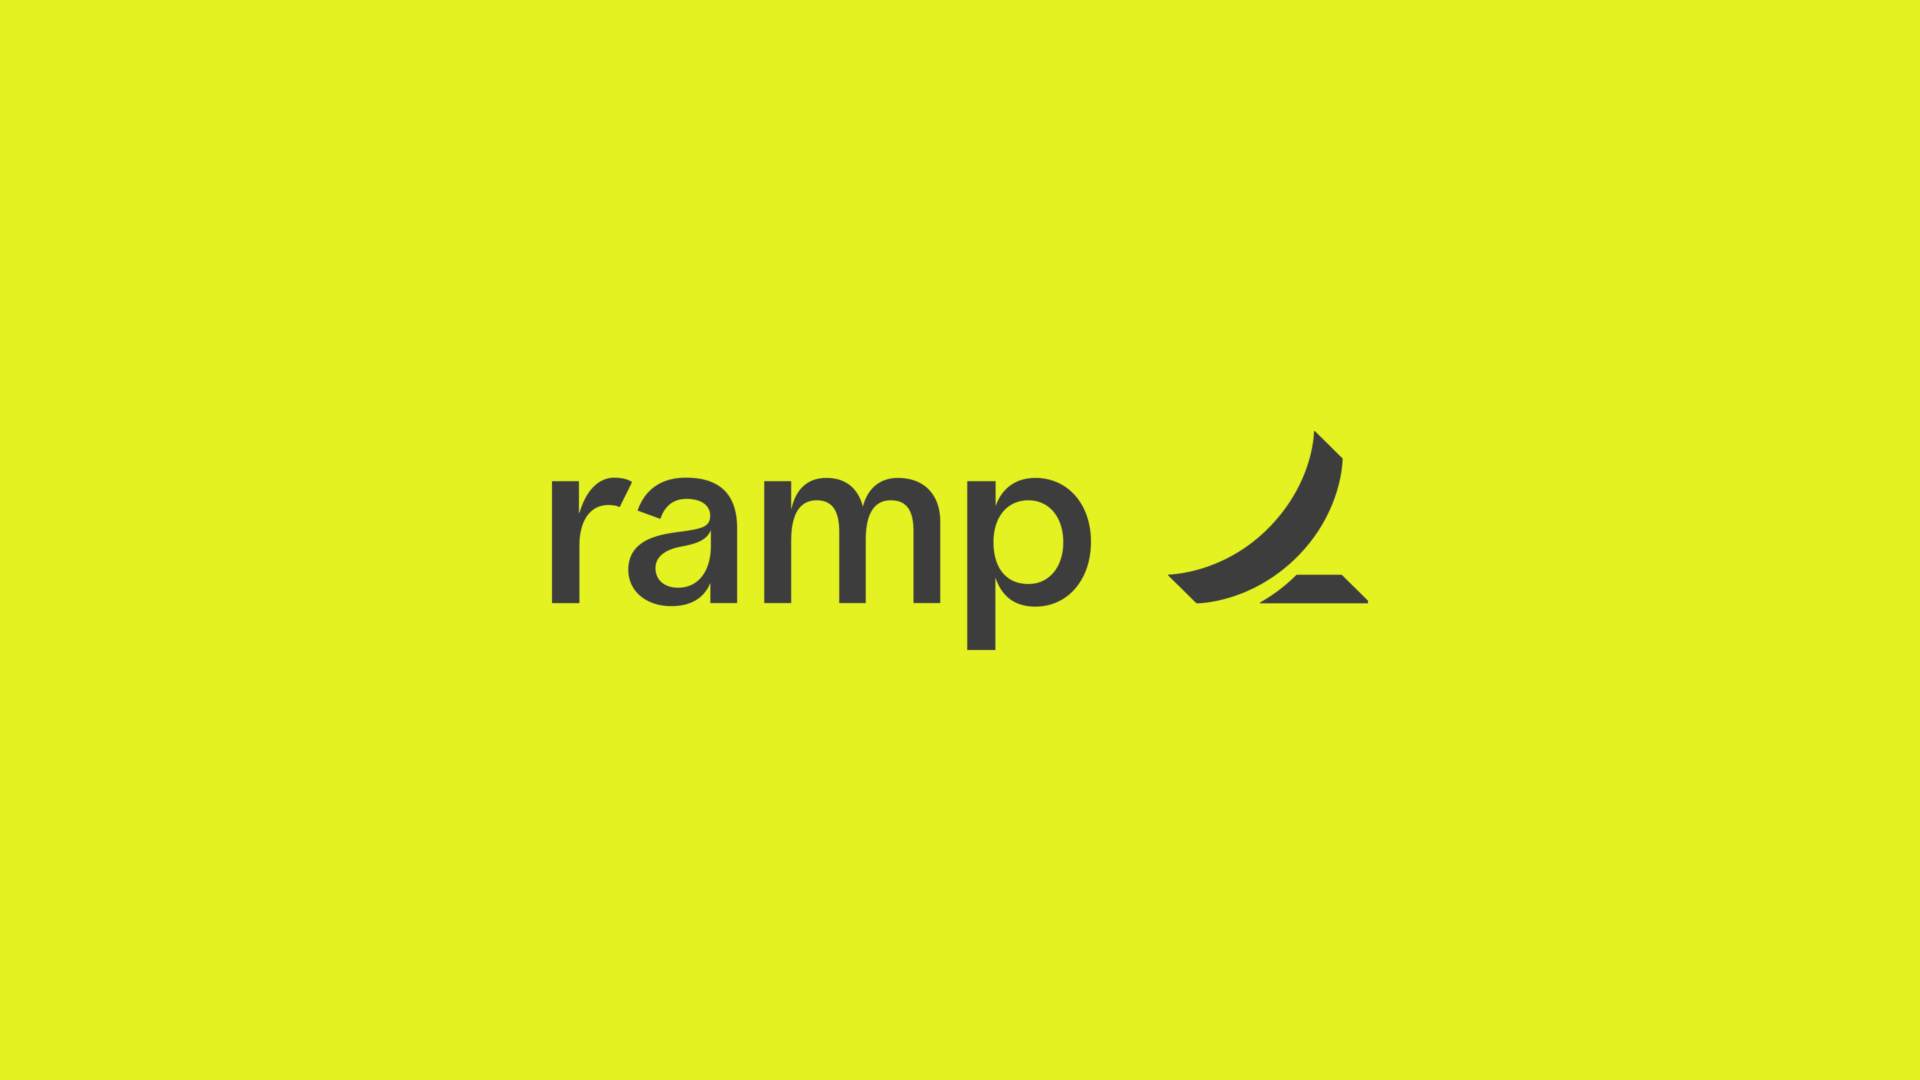 The ramp logo black with yellow background